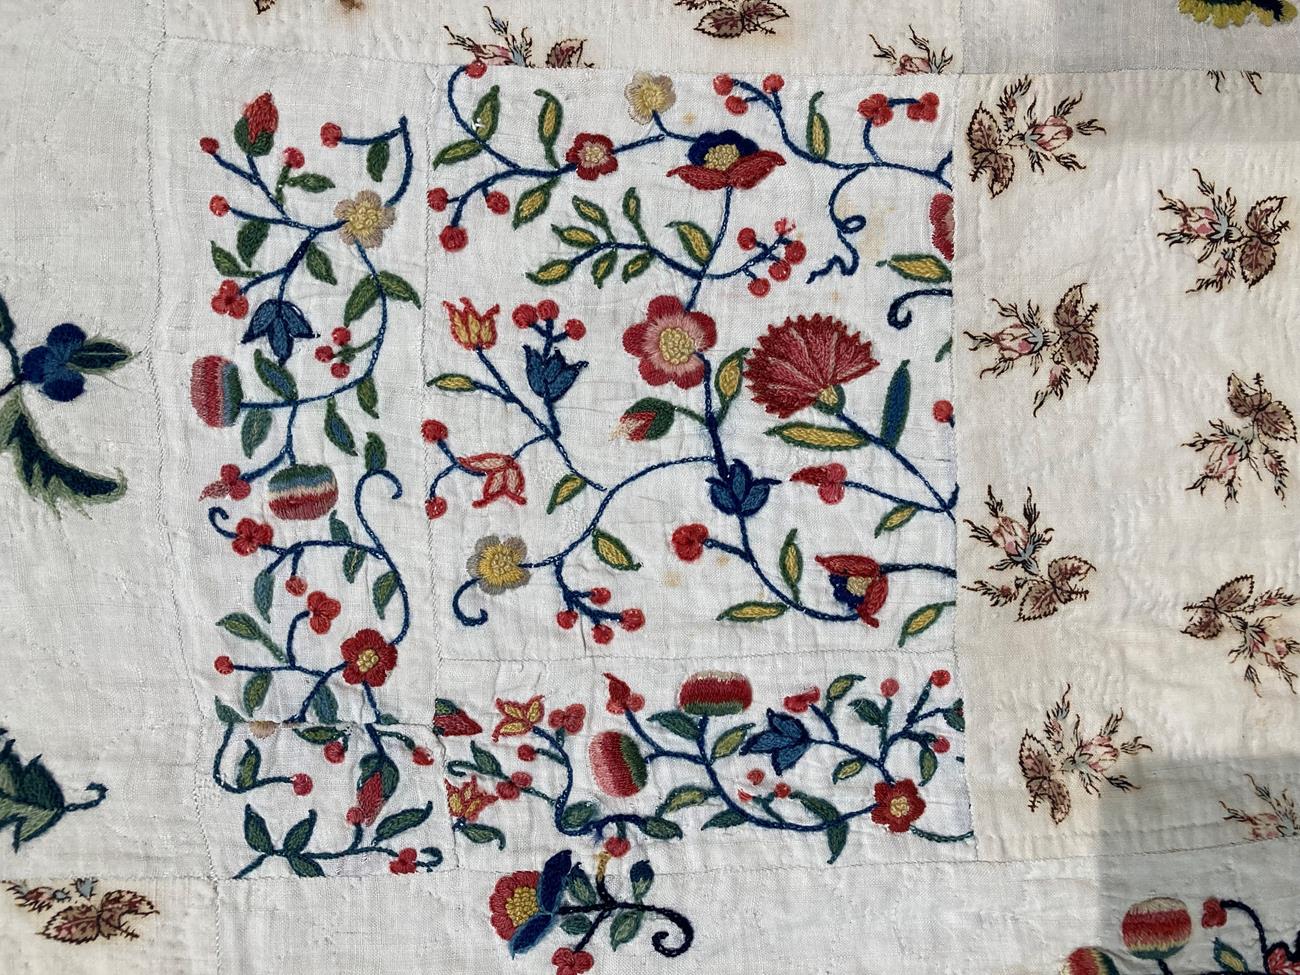 An Exceptional Early 19th Century Patchwork Quilt, with a central panel embroidered with fine wool - Image 23 of 80